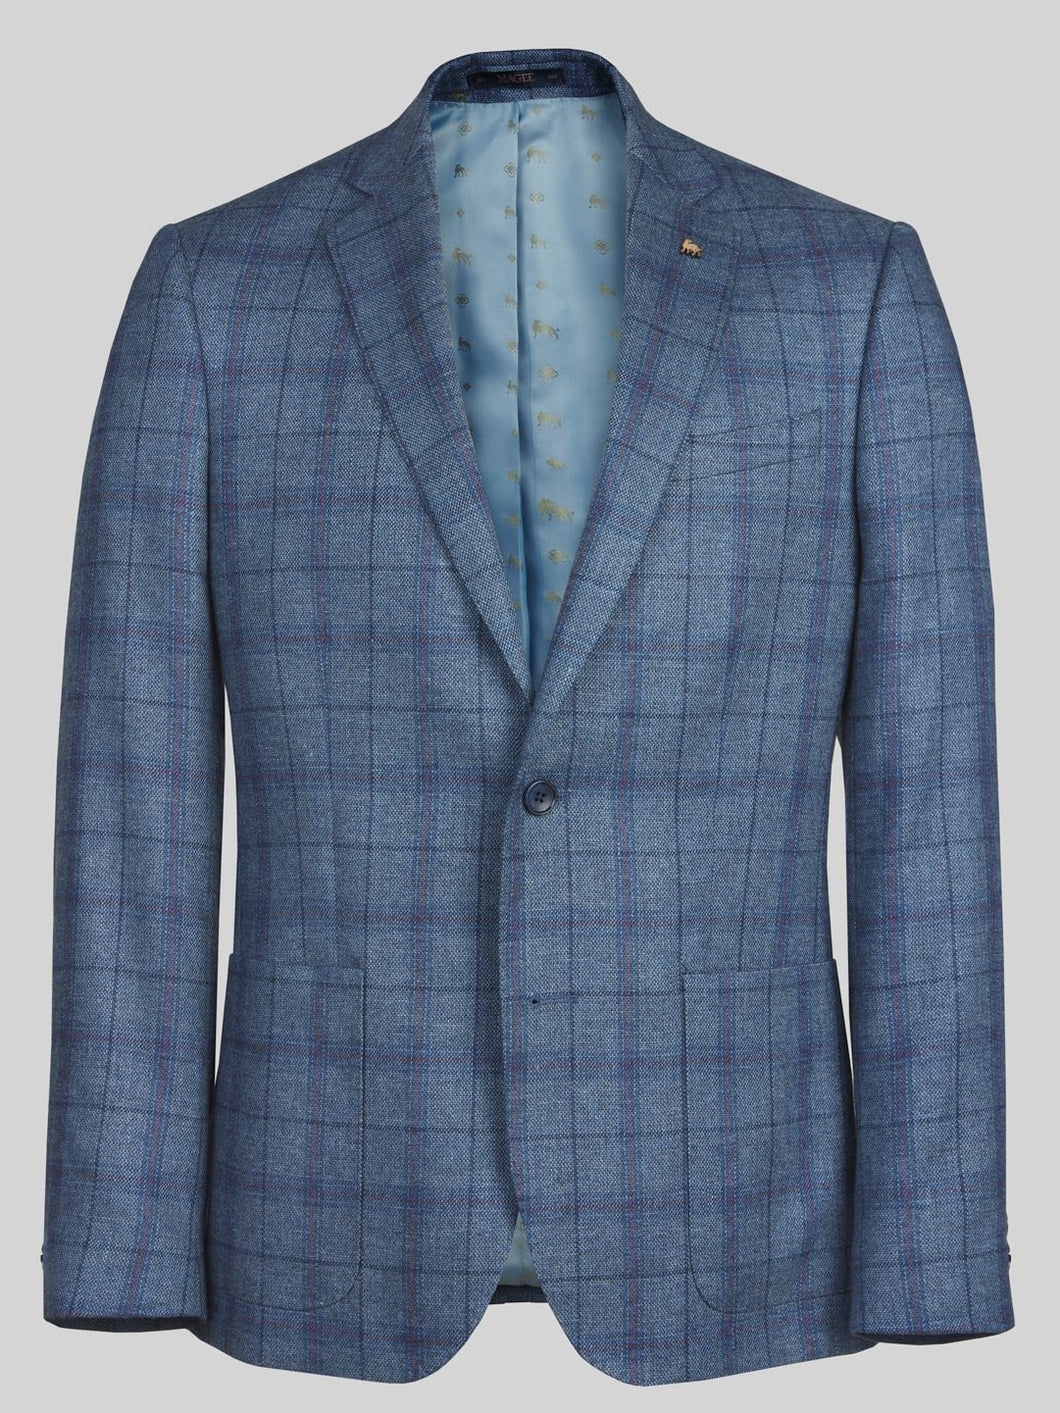 MAGEE Midweight Tweed Jacket - Mens Finn Patch Pocket - Blue with Navy, Tangerine & Raspberry Check